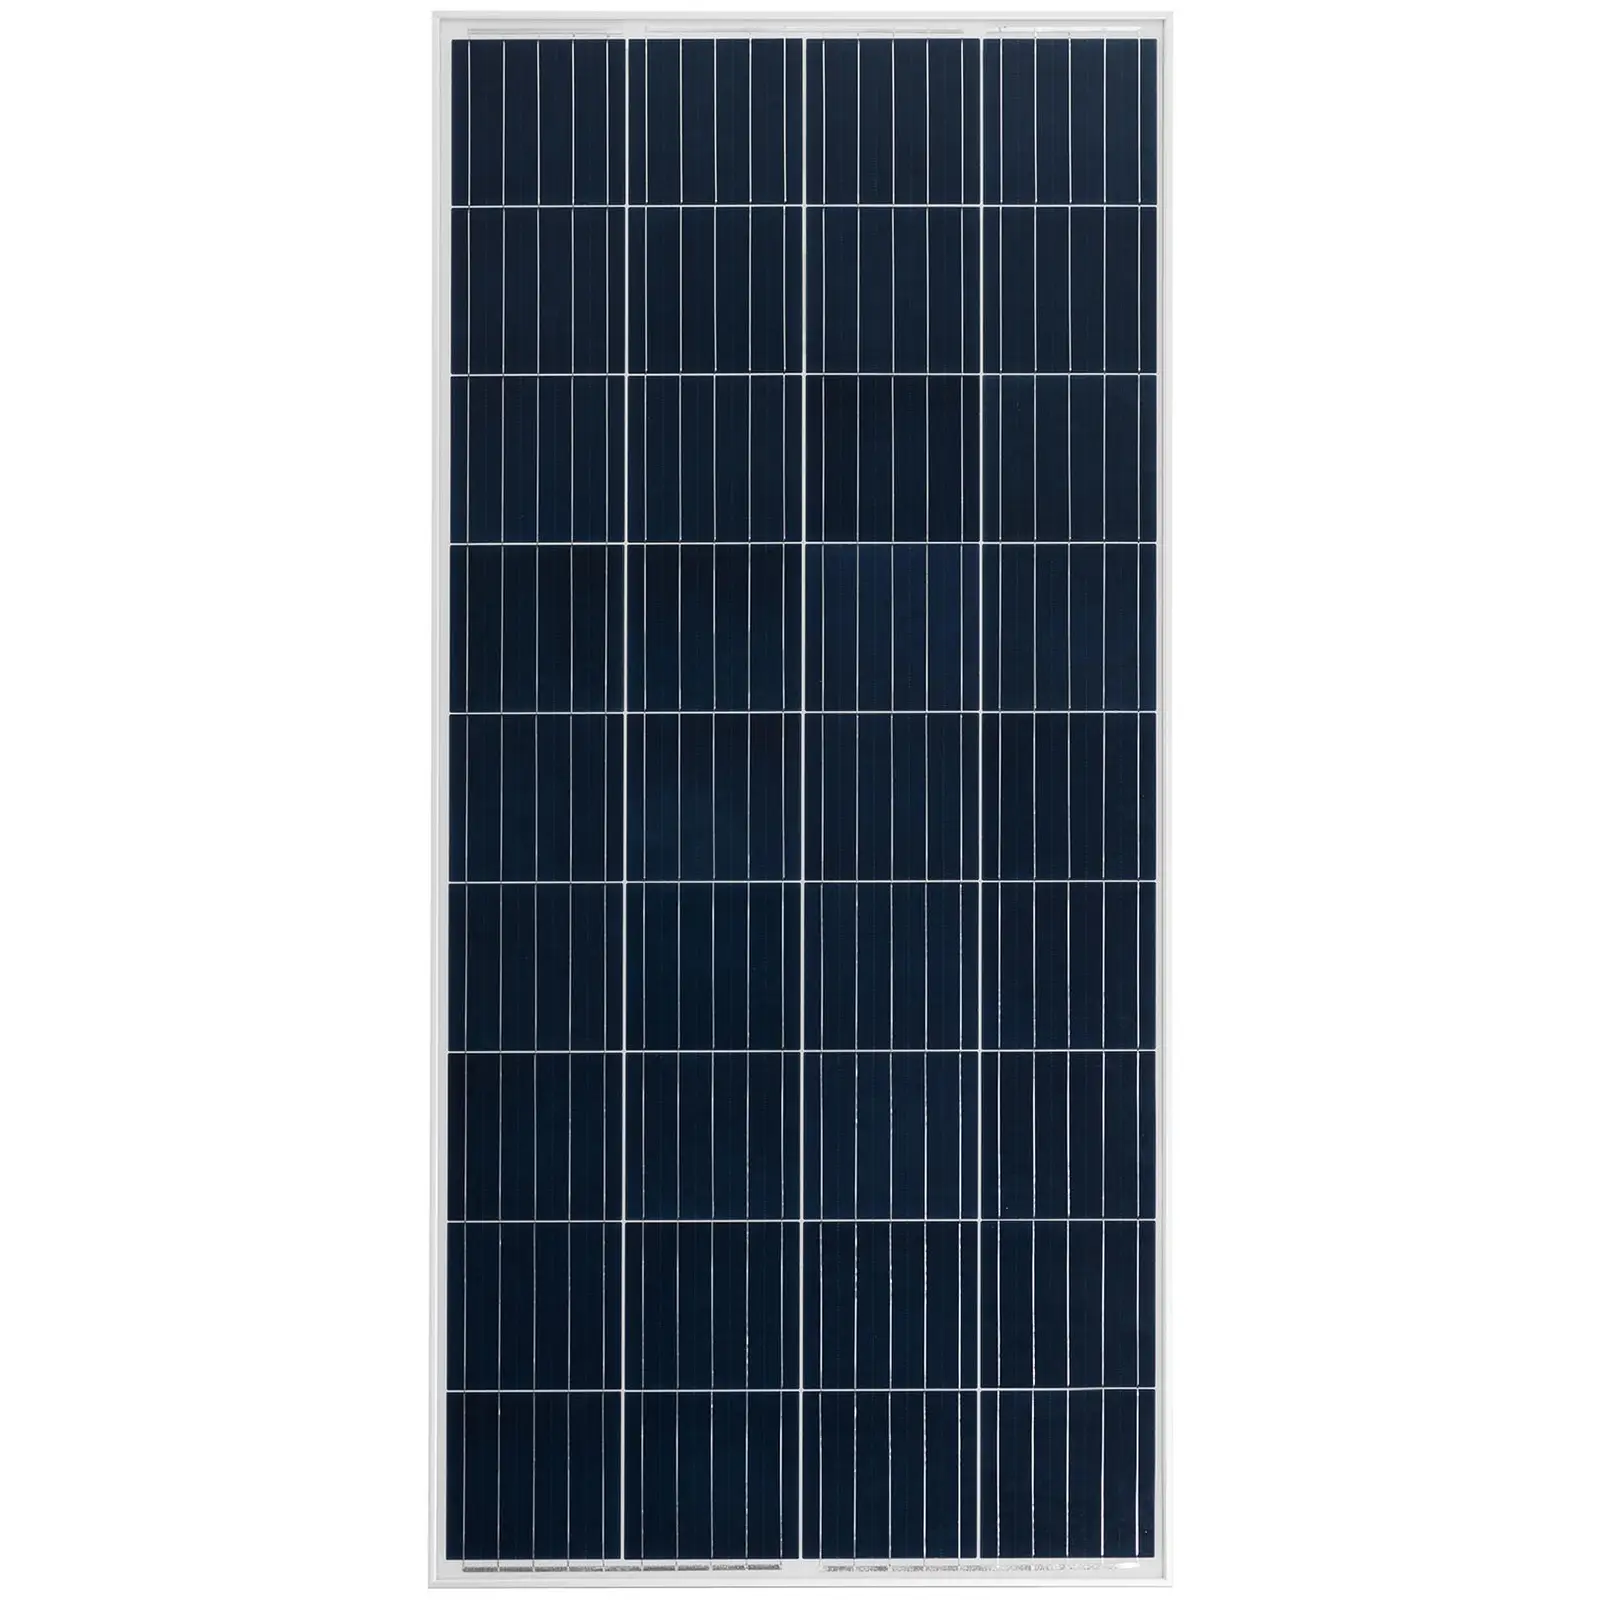 Solpanel - 170 W - 22.03 V - Med bypass-diod